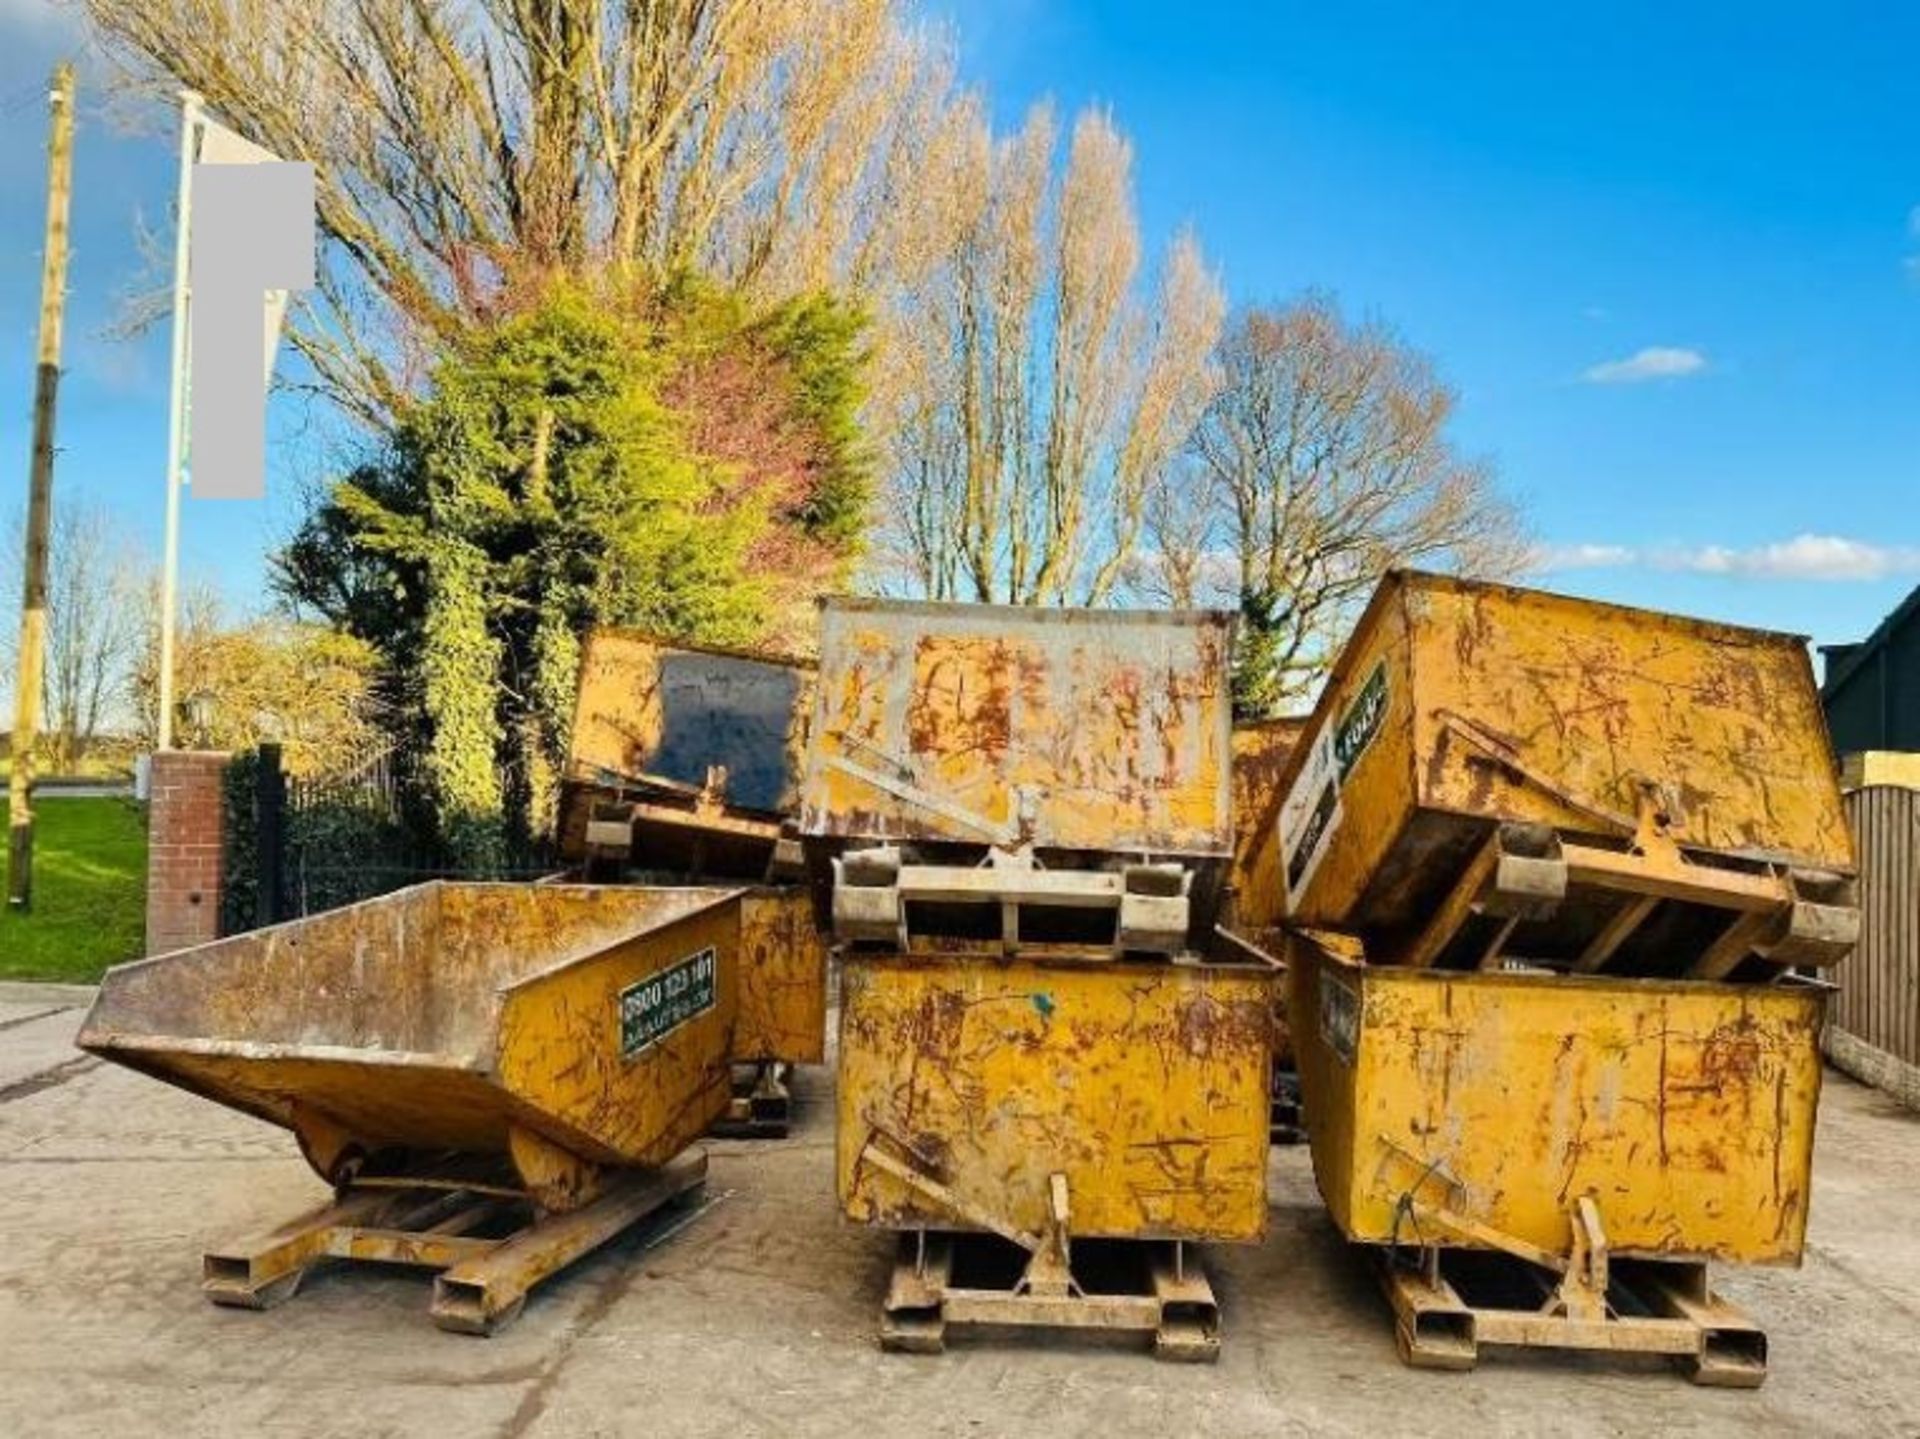 TIPPING SKIP TO SUIT PALLET TINES (CHOICE OF 7 - LISTING FOR ONE)